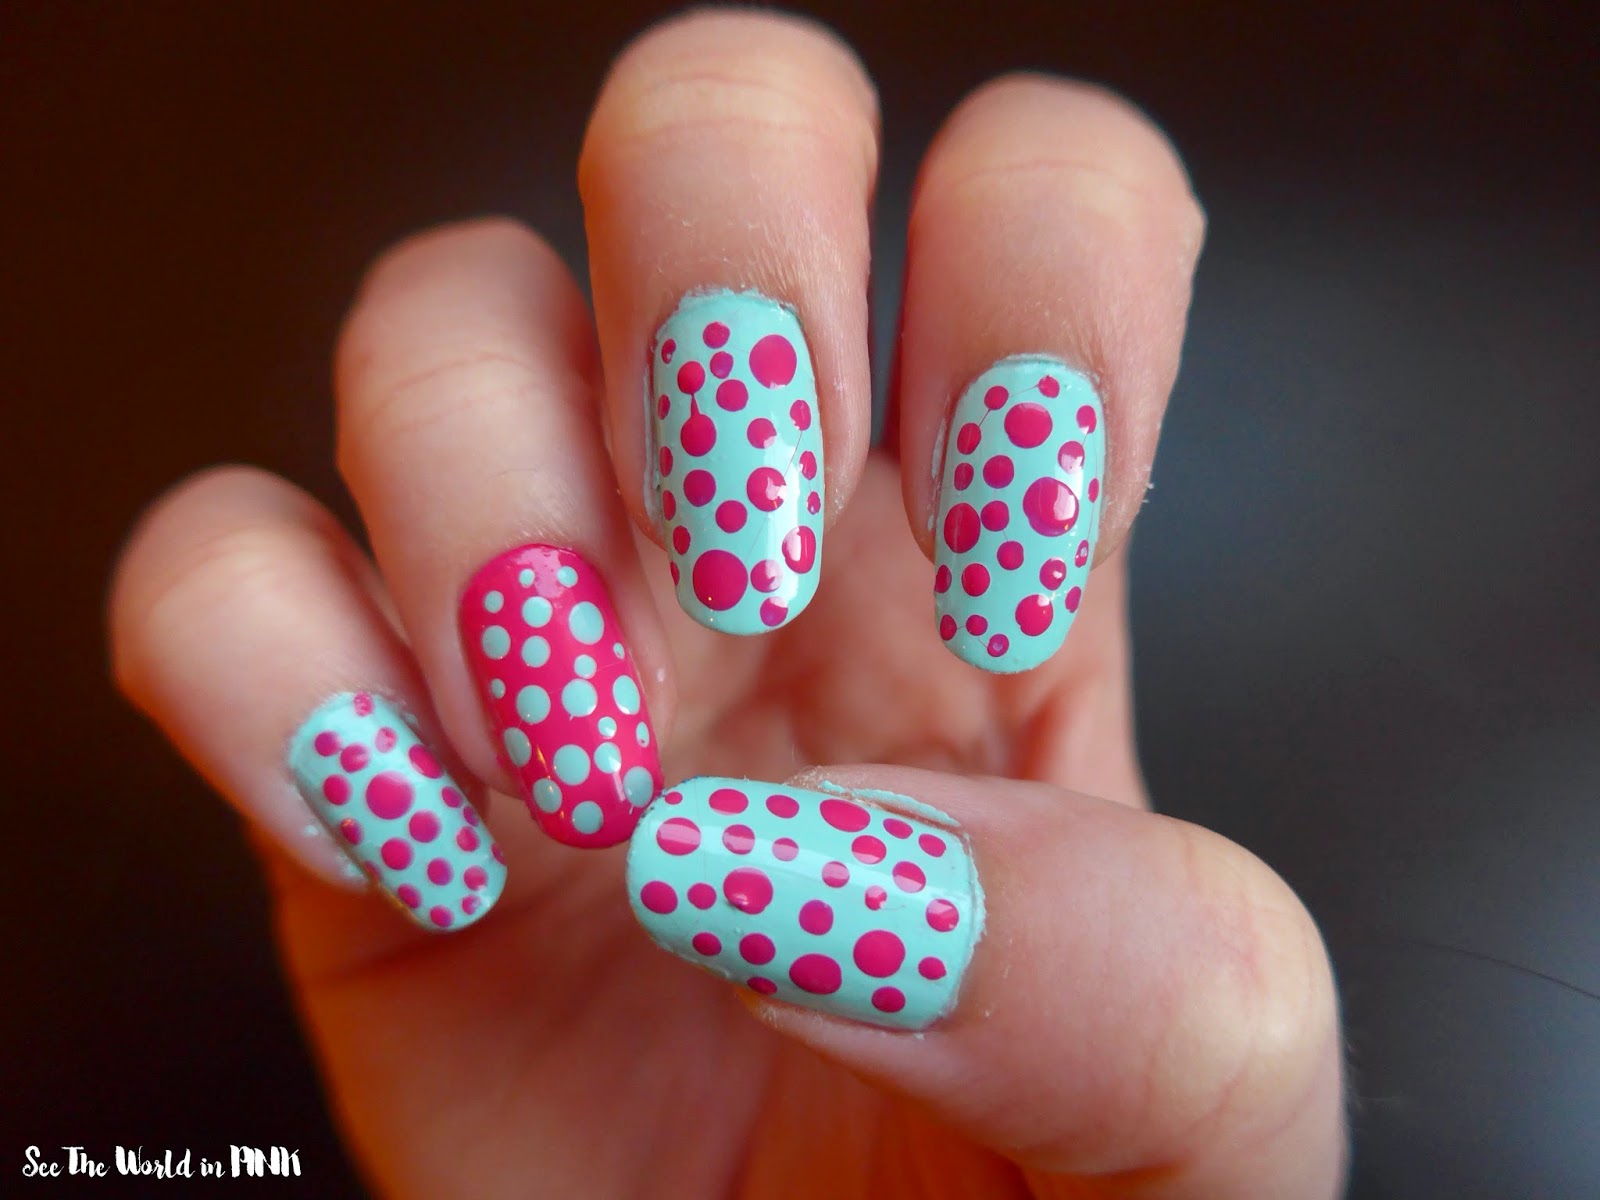 Manicure Monday (polka dot nails) + Monthly Pedicure (mermaid toes ...